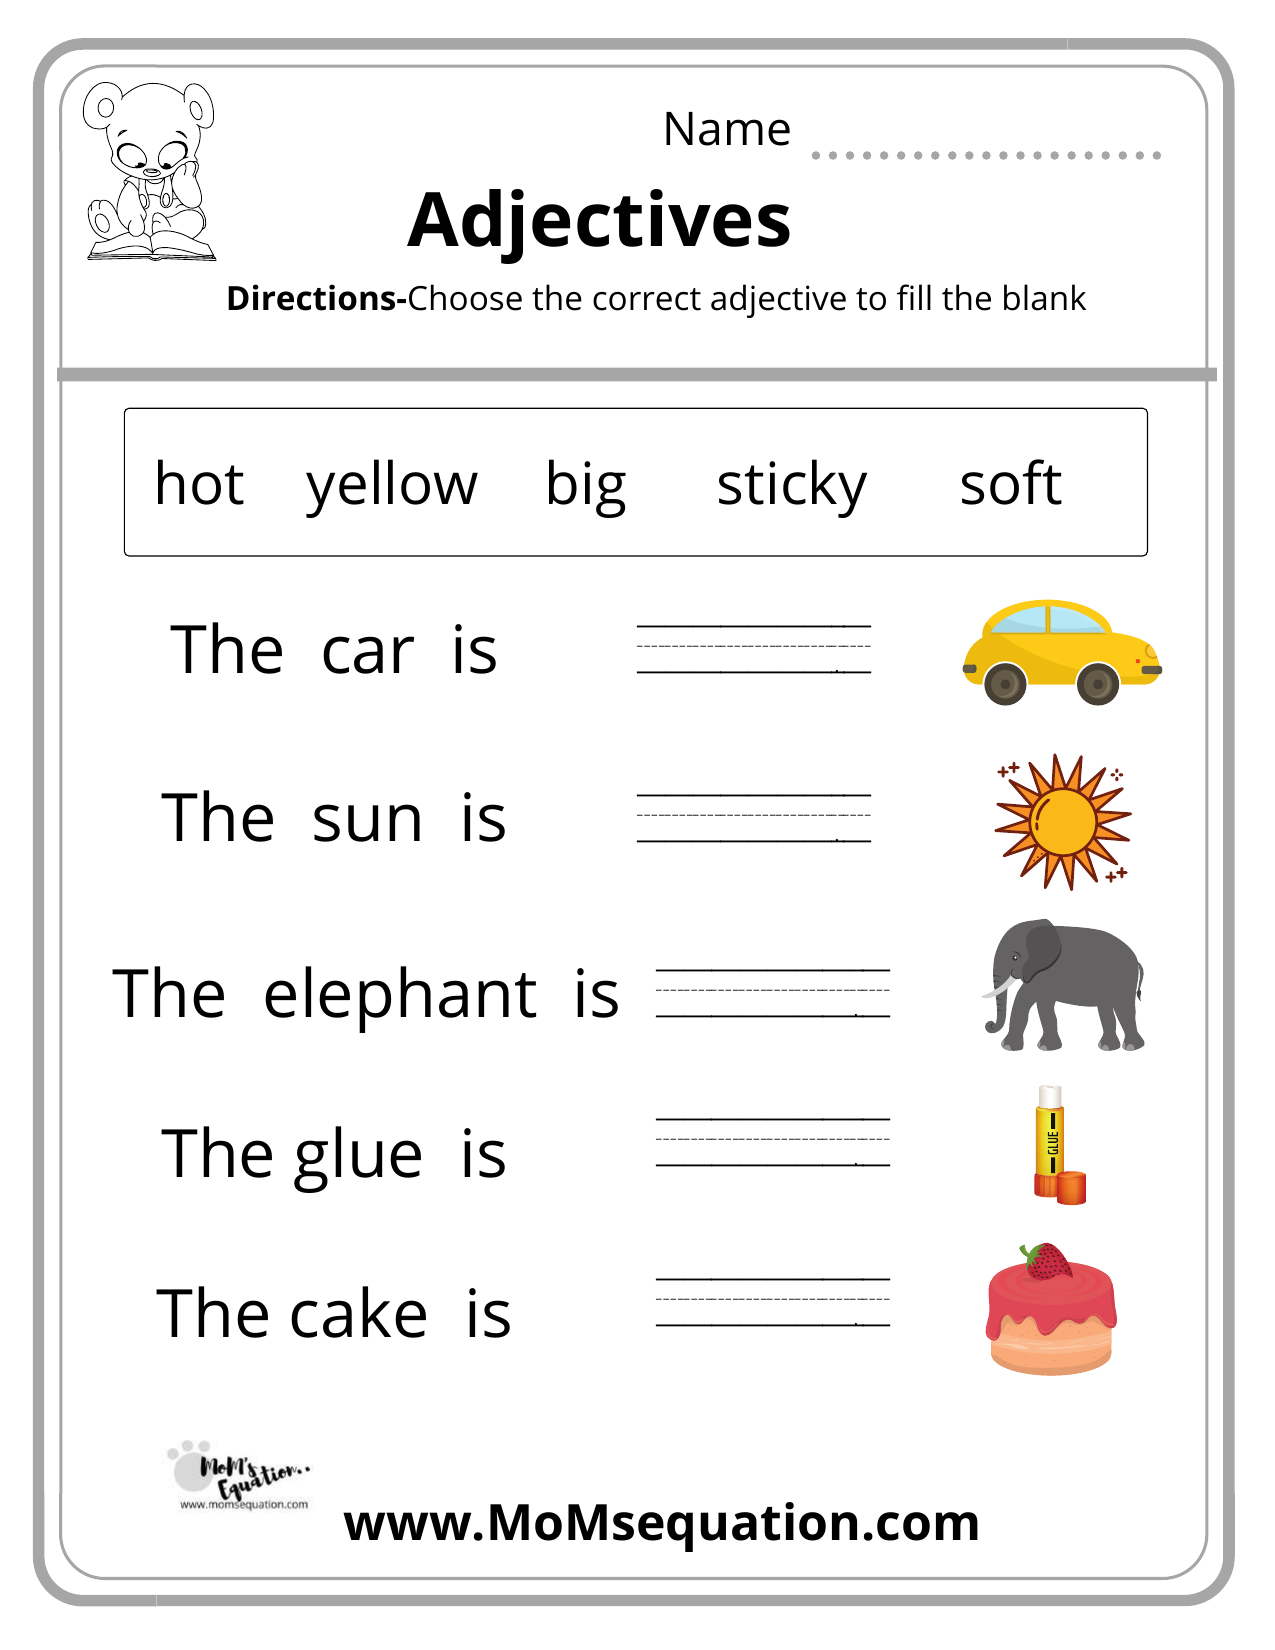 fill-in-the-blanks-with-the-right-adjective-adjectives-adjectives-esl-grammar-worksheets